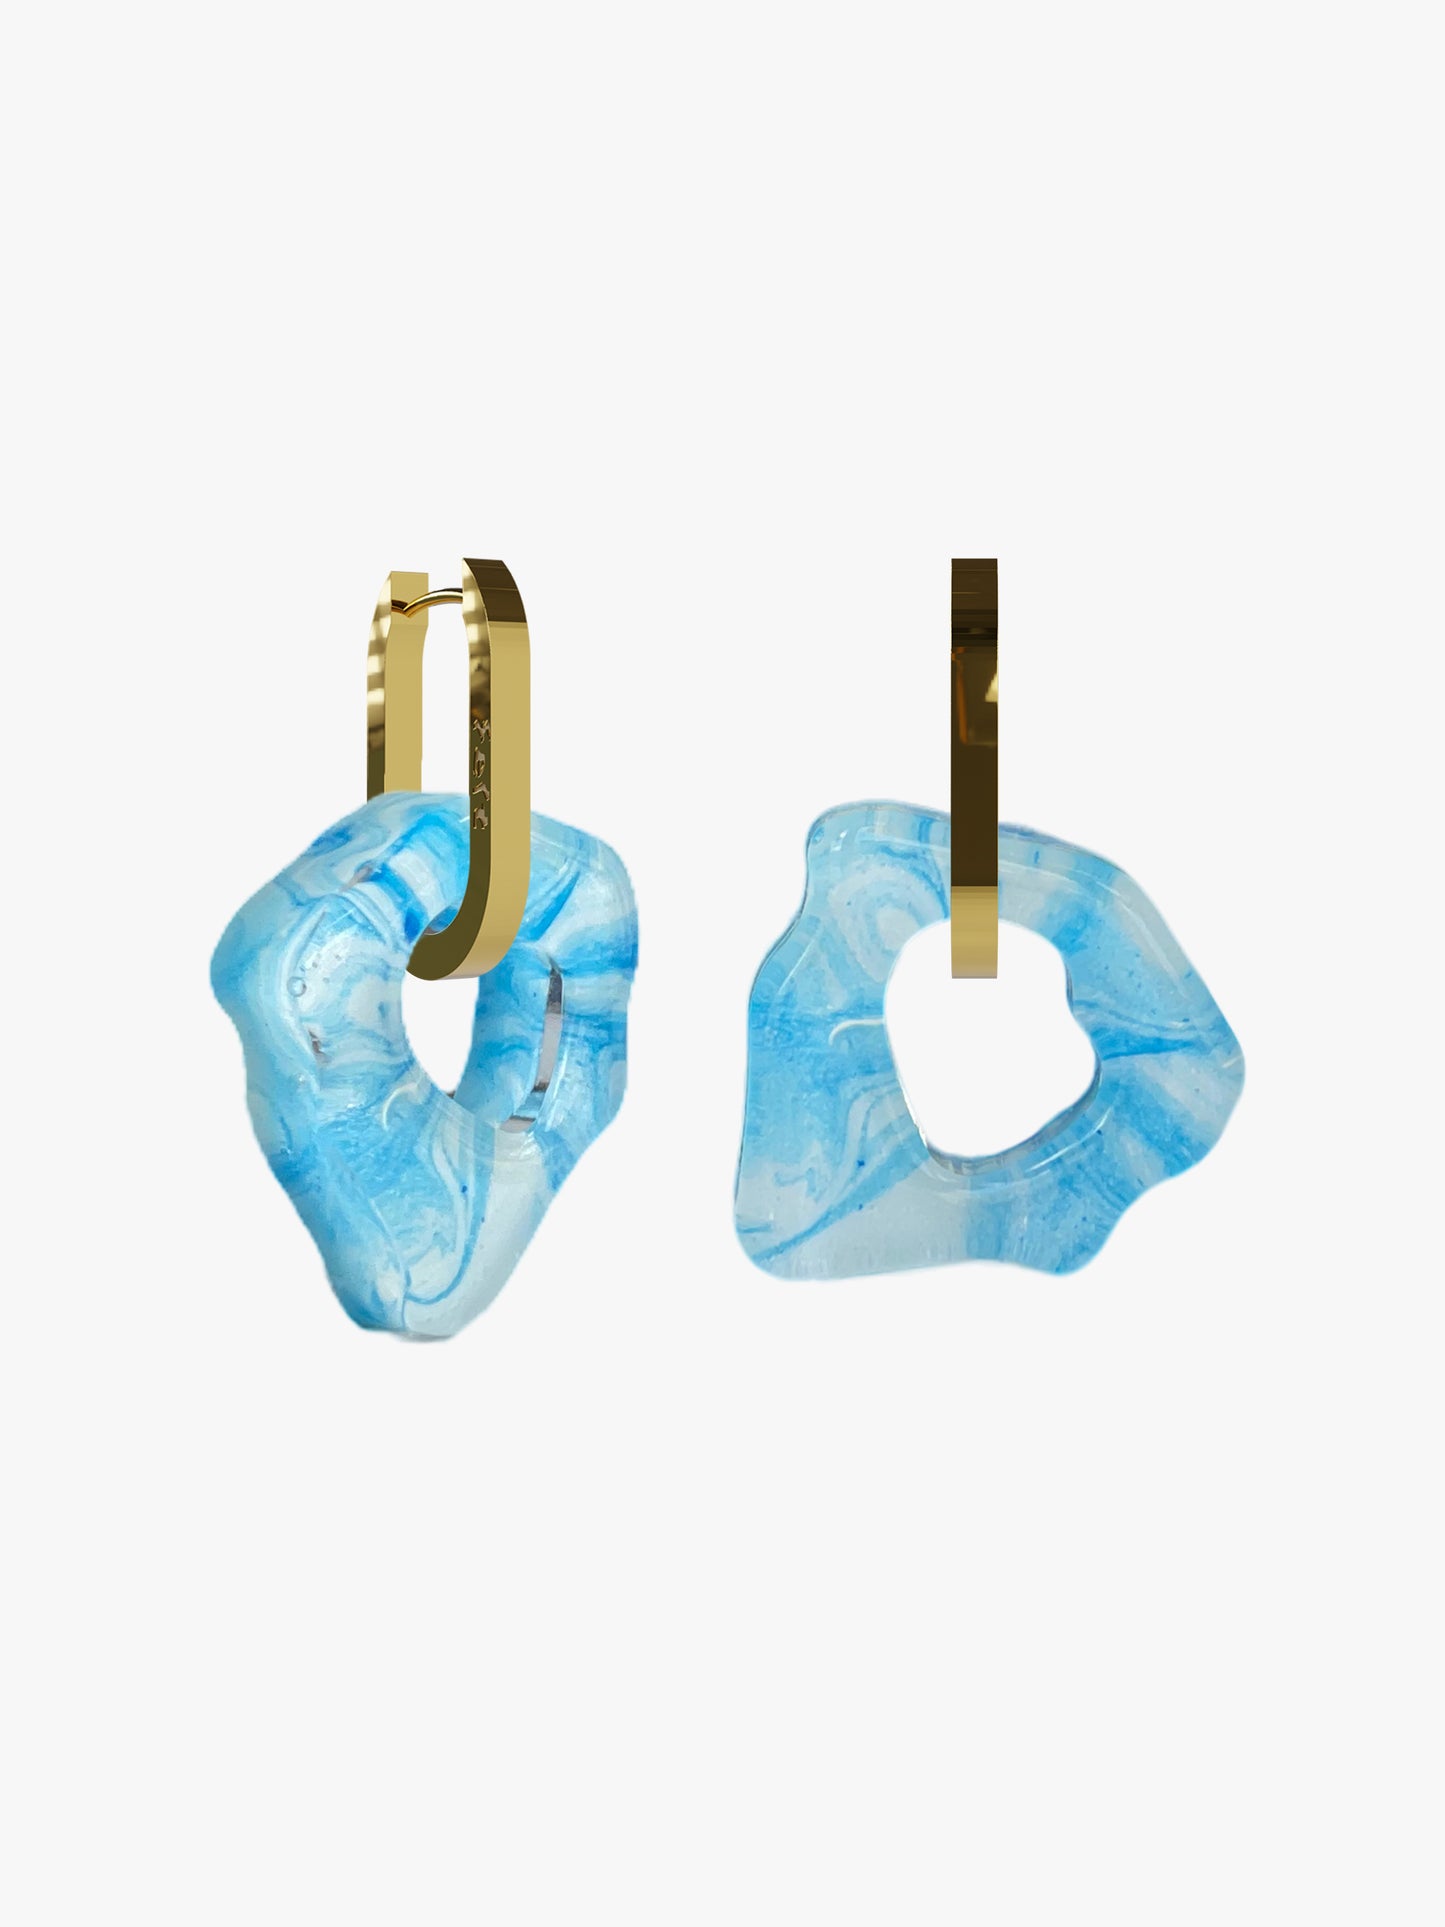 Ora marble blue gold earring (pair)